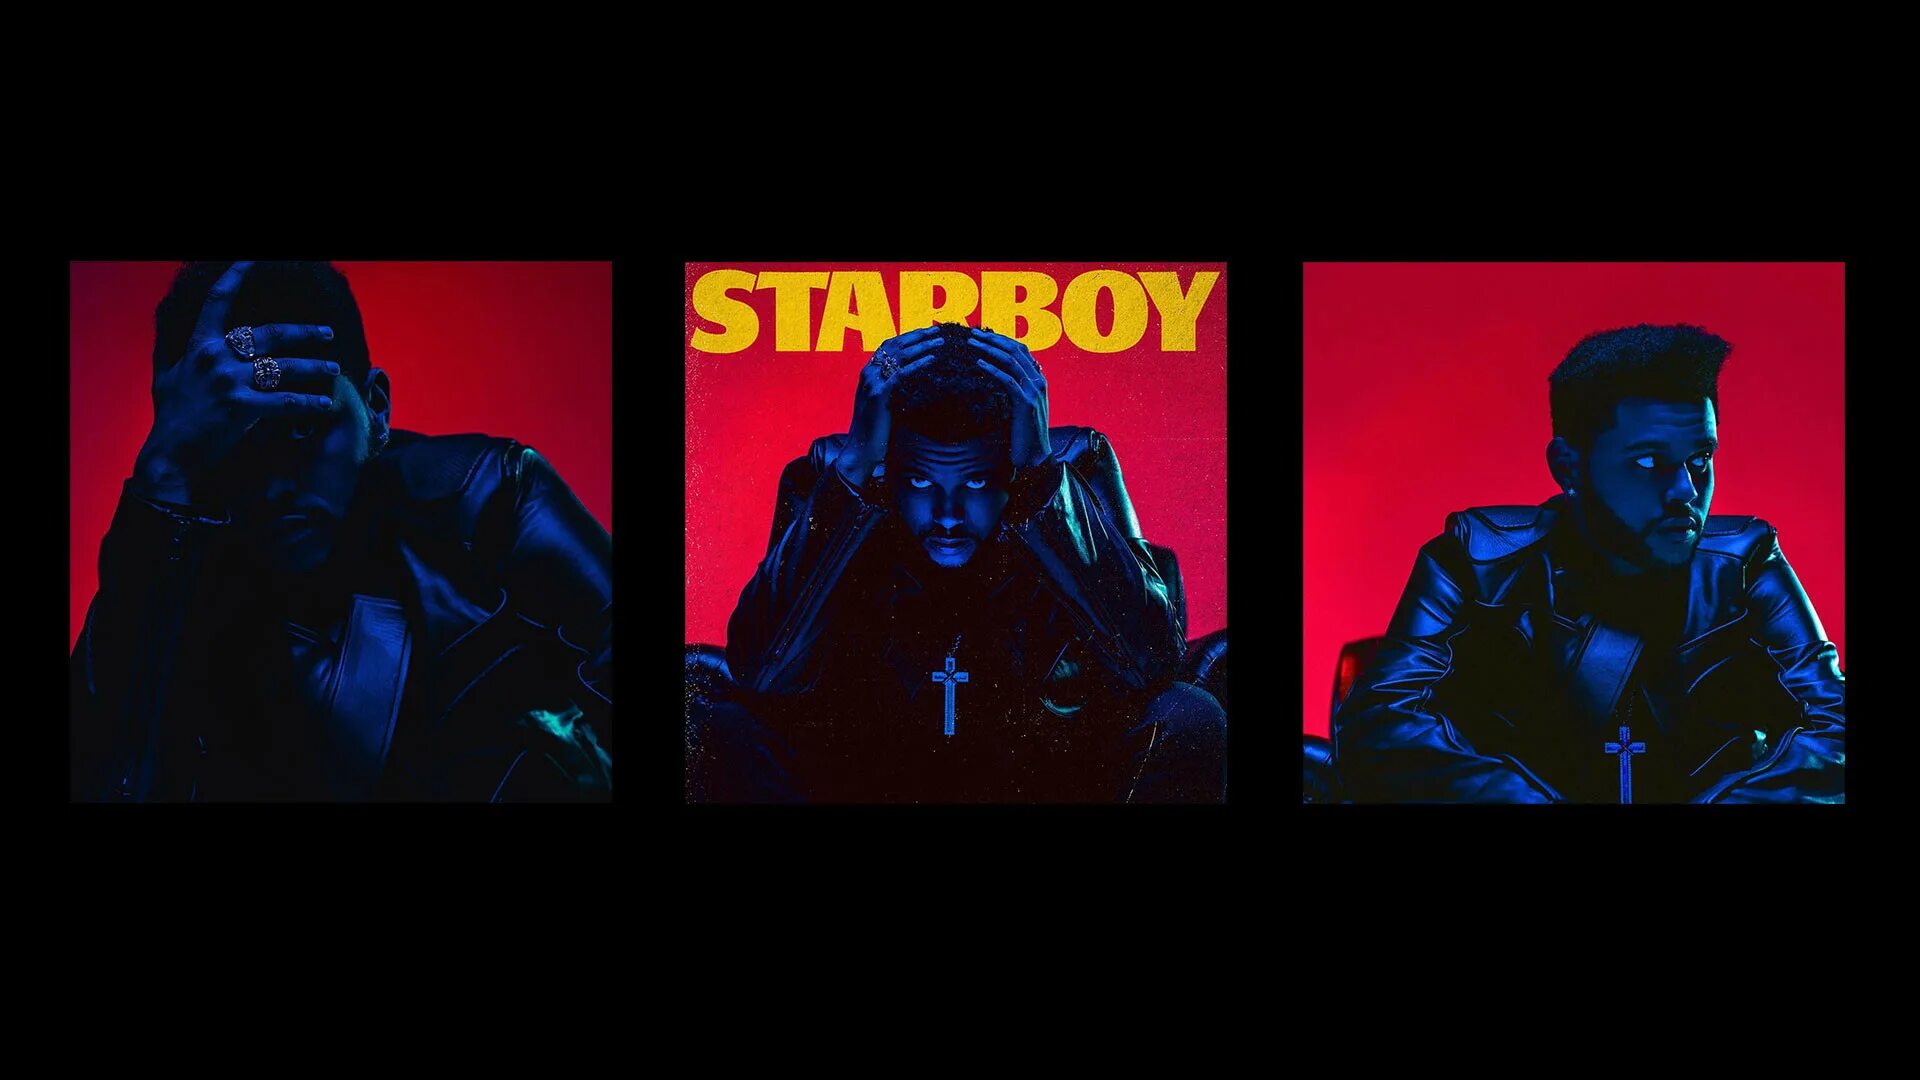 Again the weekend. The Weeknd 2022. The Weeknd Starboy album Cover. Starboy the Weeknd обложка. The Weeknd Эстетика.